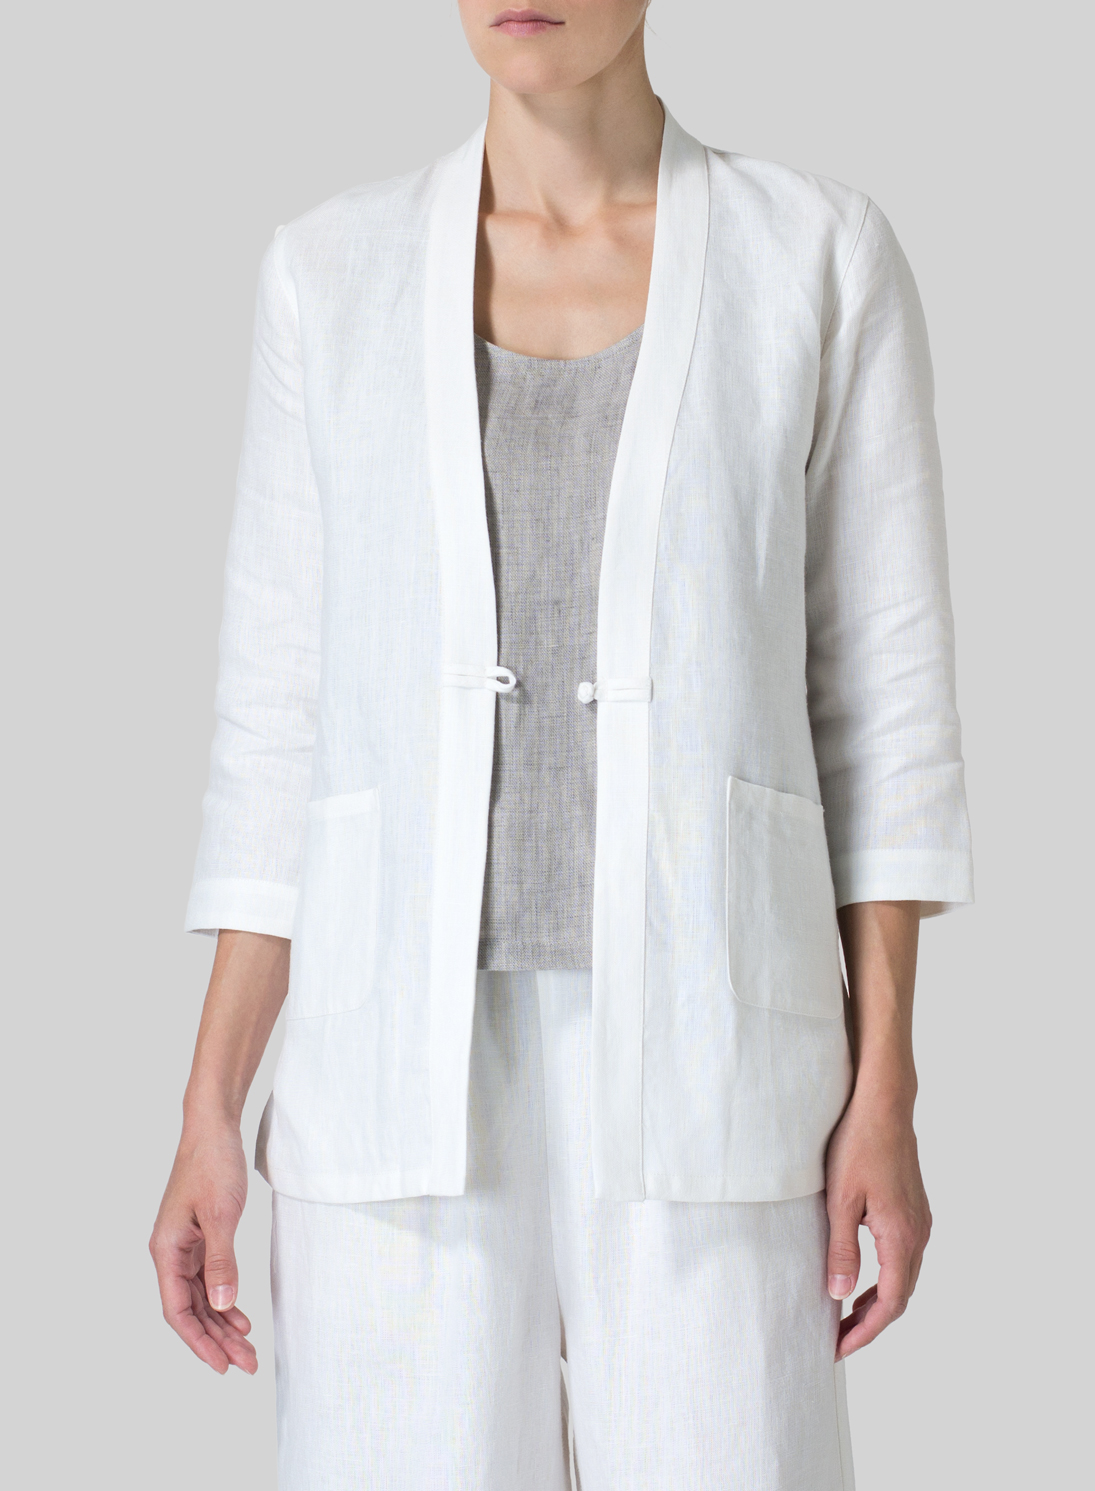 White Linen Handmade Knot Button Tapered Jacket